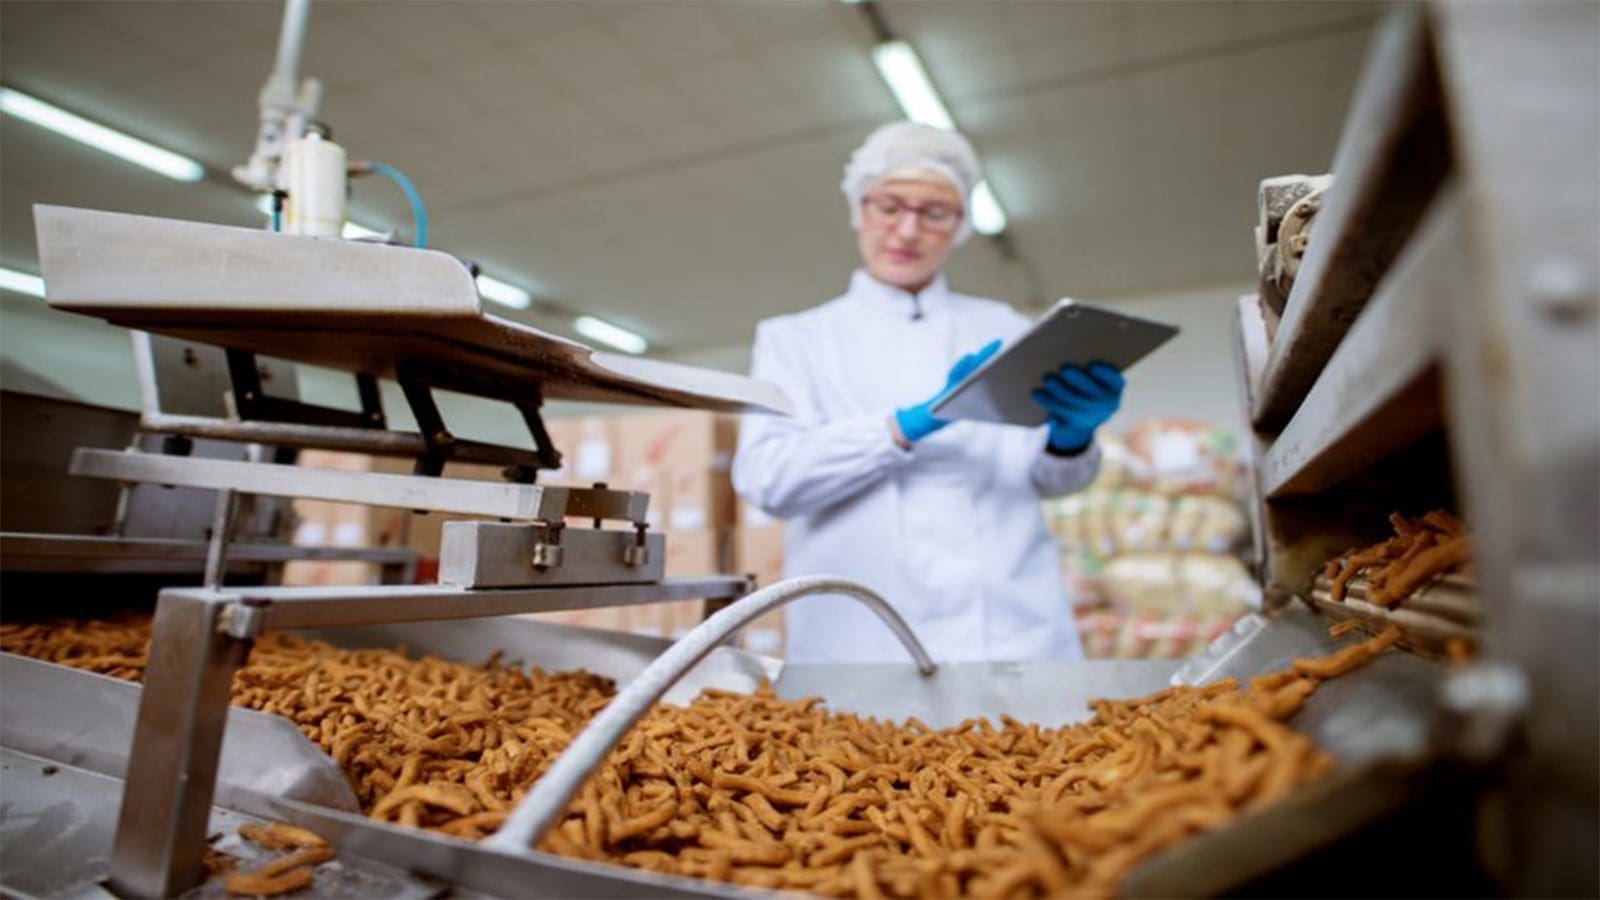 FSSAI urges officials to increase food safety inspections